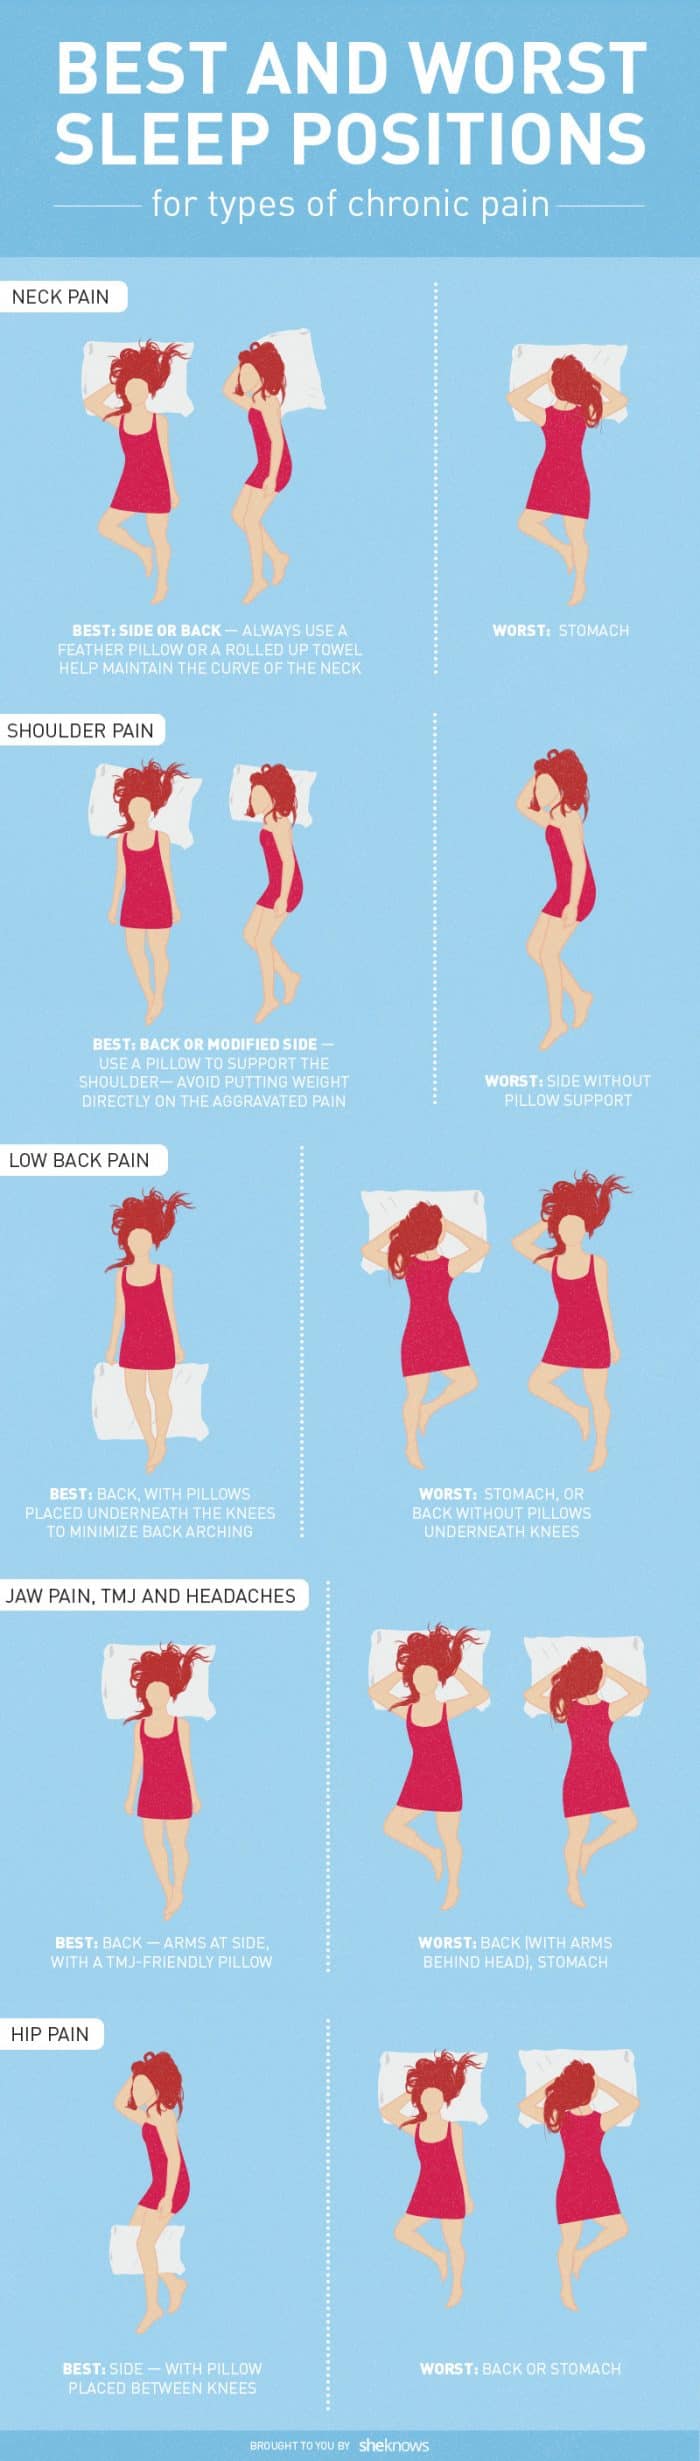 examples of the best and worst sleeping positions effects on pains